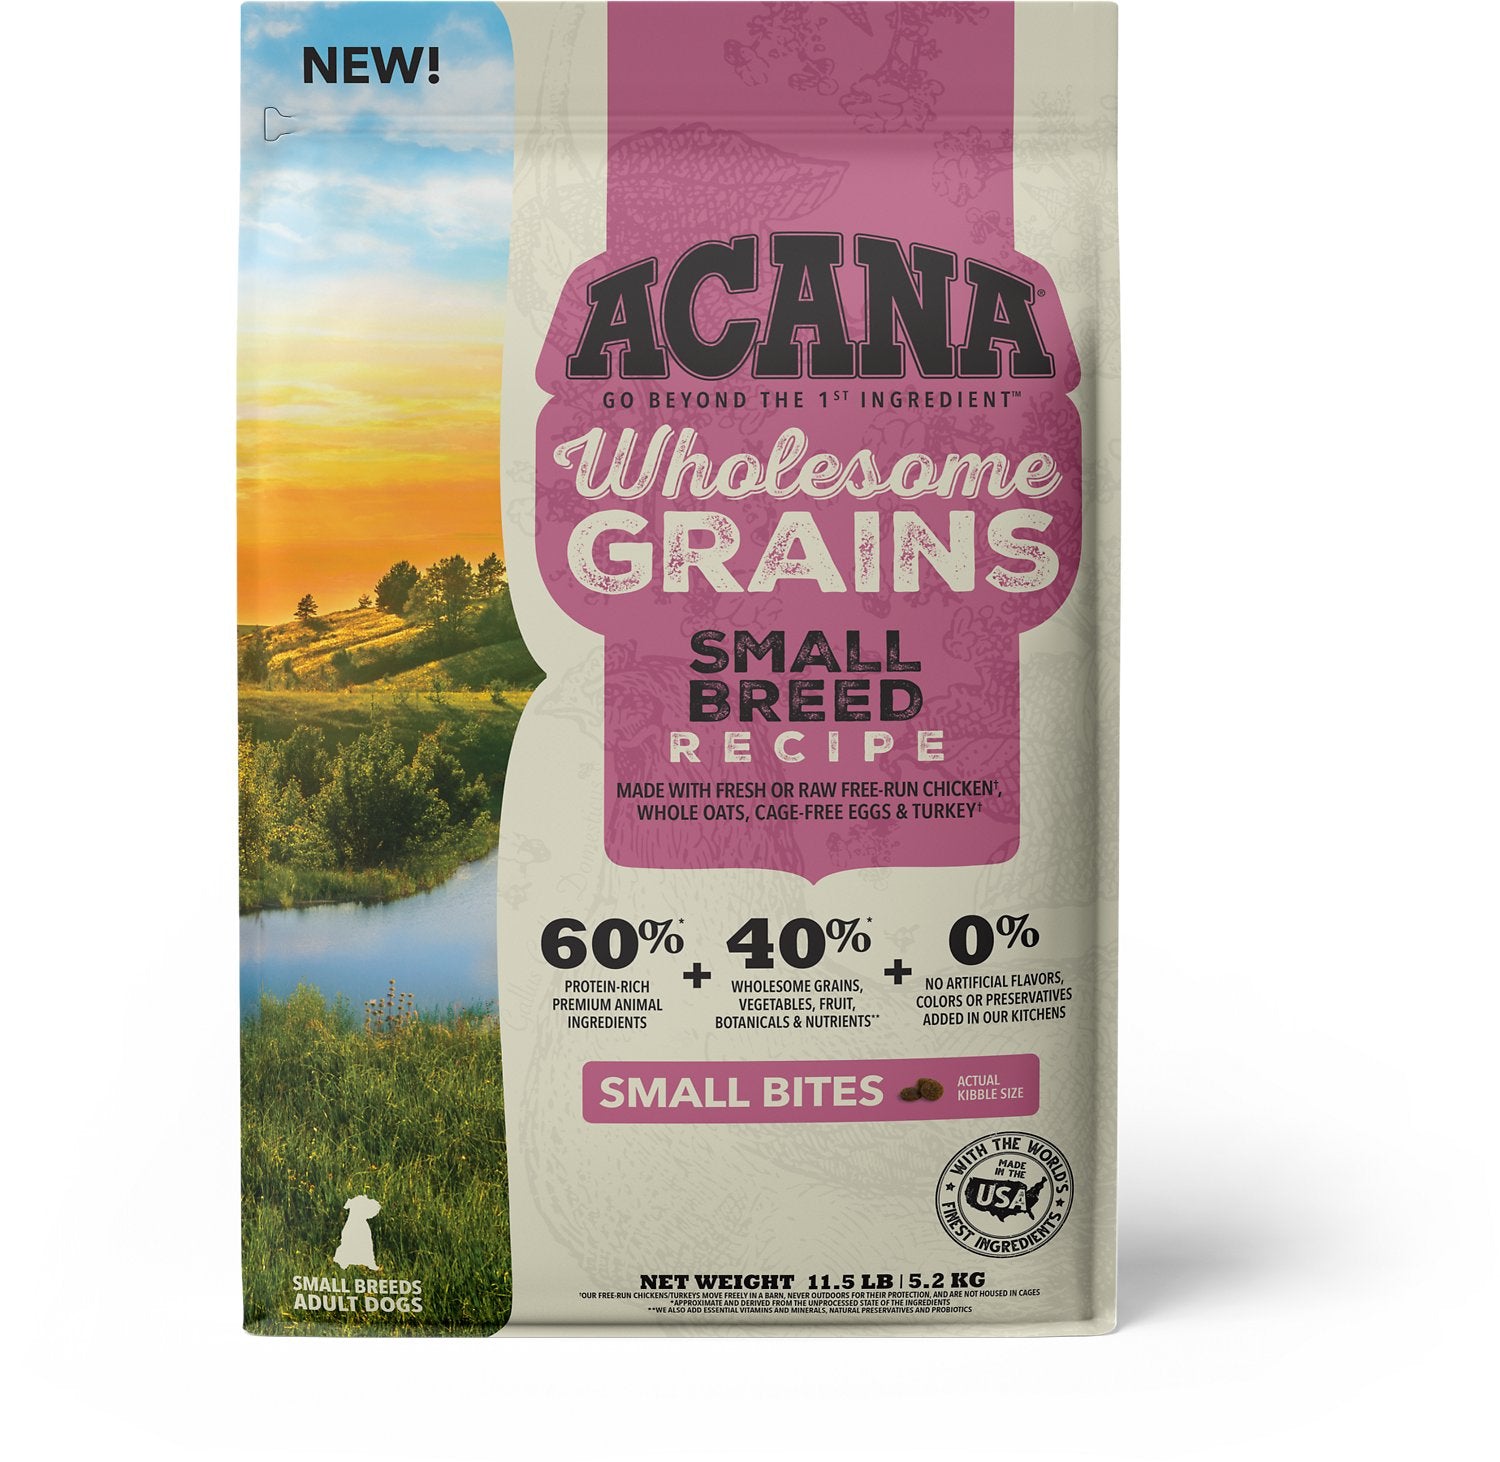 Acana Wholesome Grains Small Breed Recipe Dry Dog Food